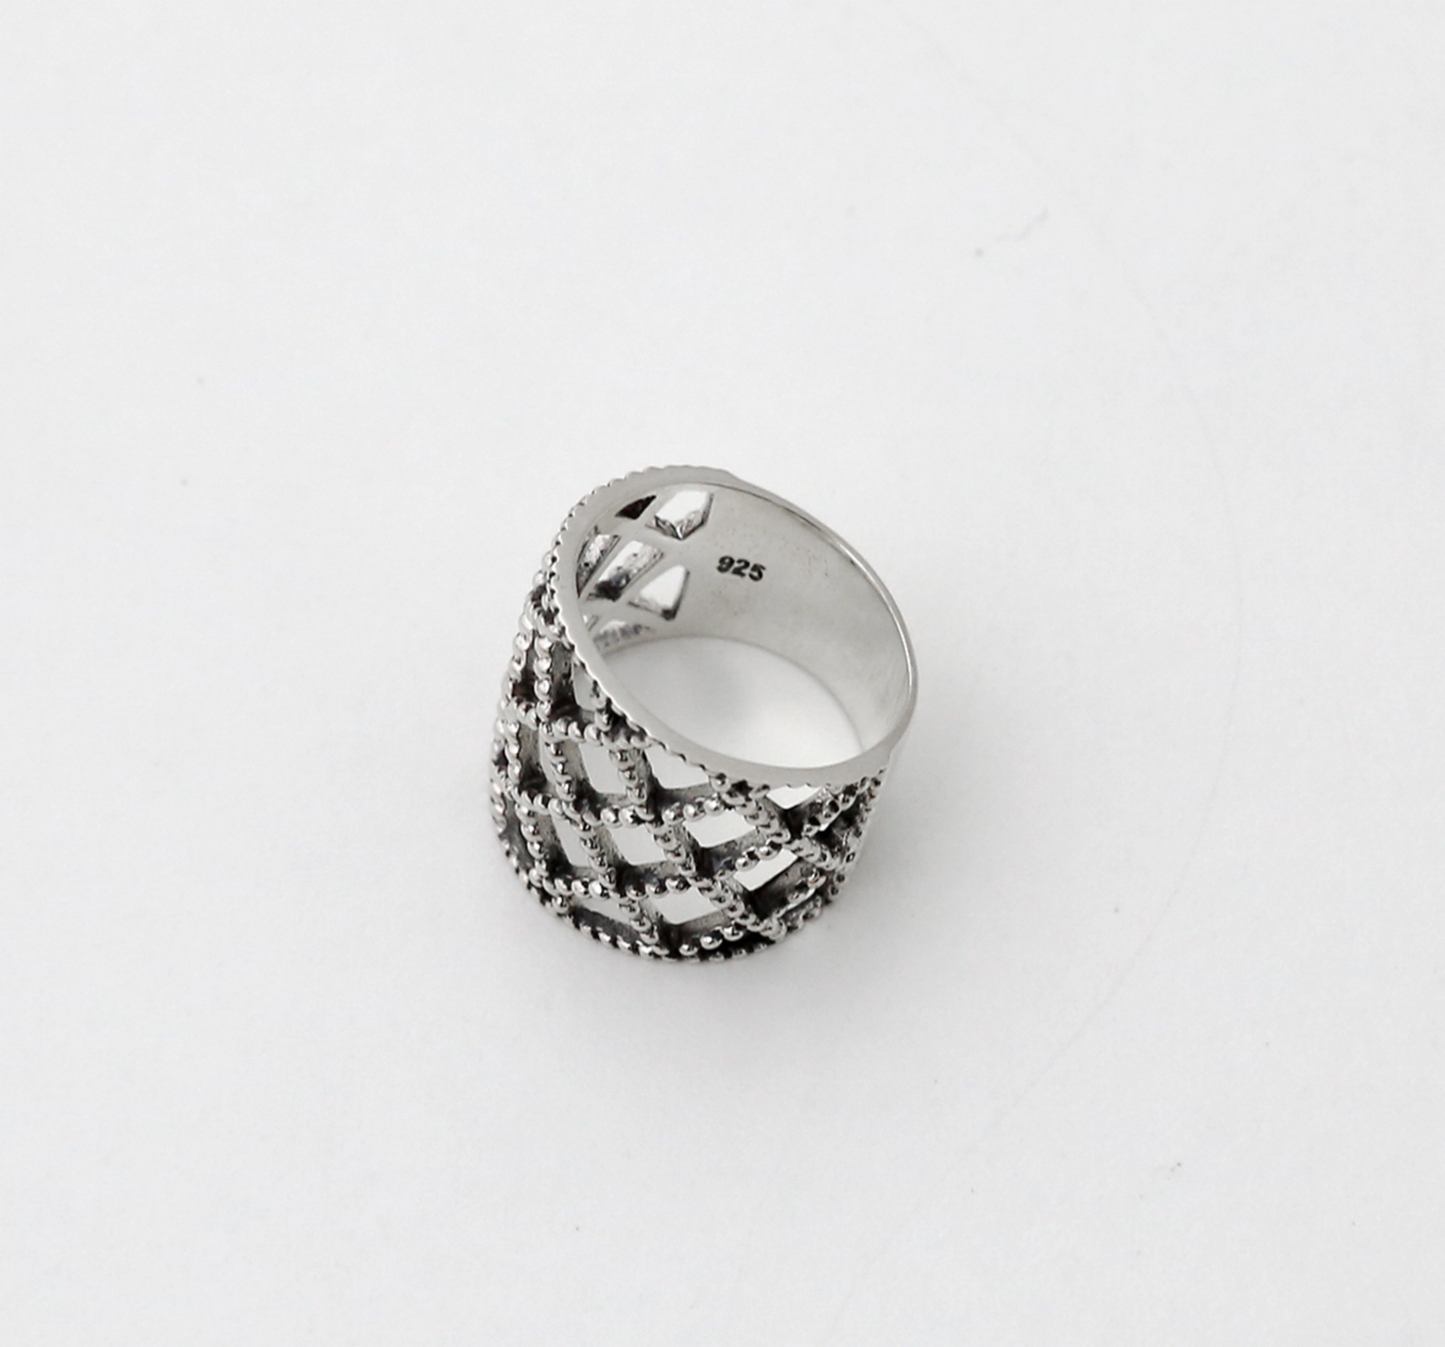 925 Sterling Silver Thick lace Cuff ring, Filigree Tube ring, Net Diamond ring,Wide and Thick ring, Stacking Ring